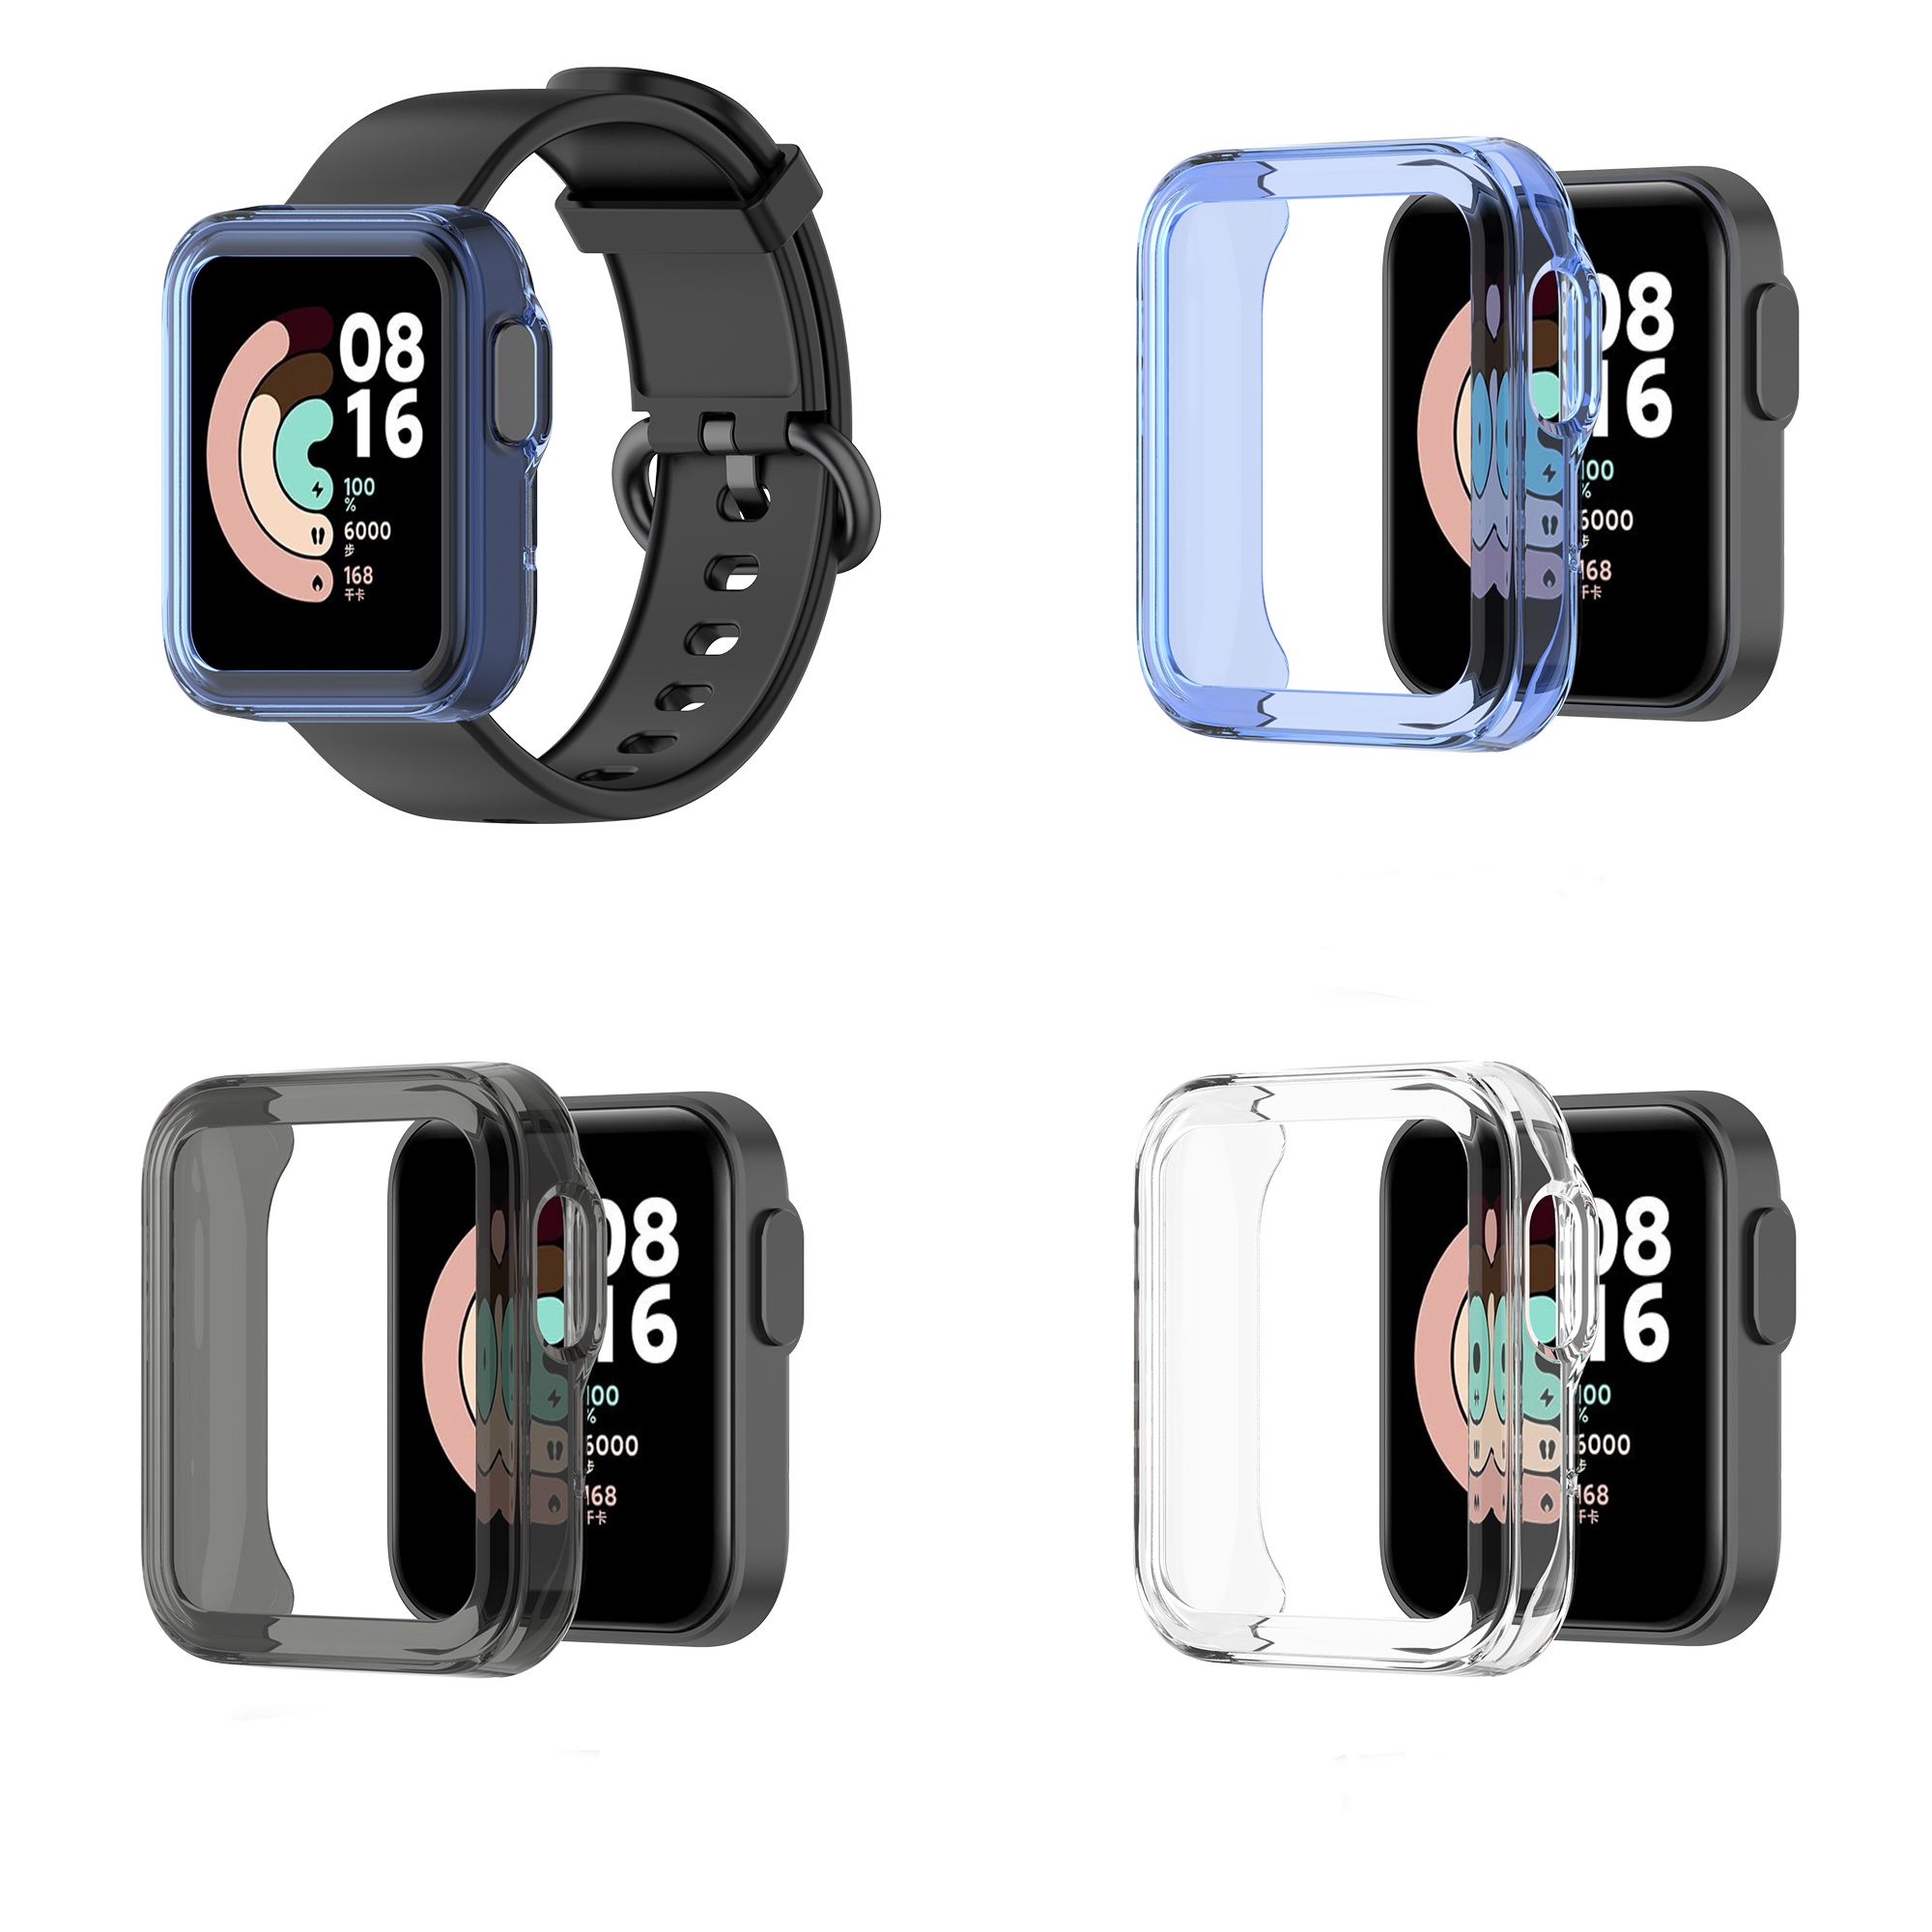 Bakeey-Transparent-TPU-Half-pack-Watch-Case-Cover-Watch-Protector-For-Xiaomi-Mi-Watch-Lite-1819481-1